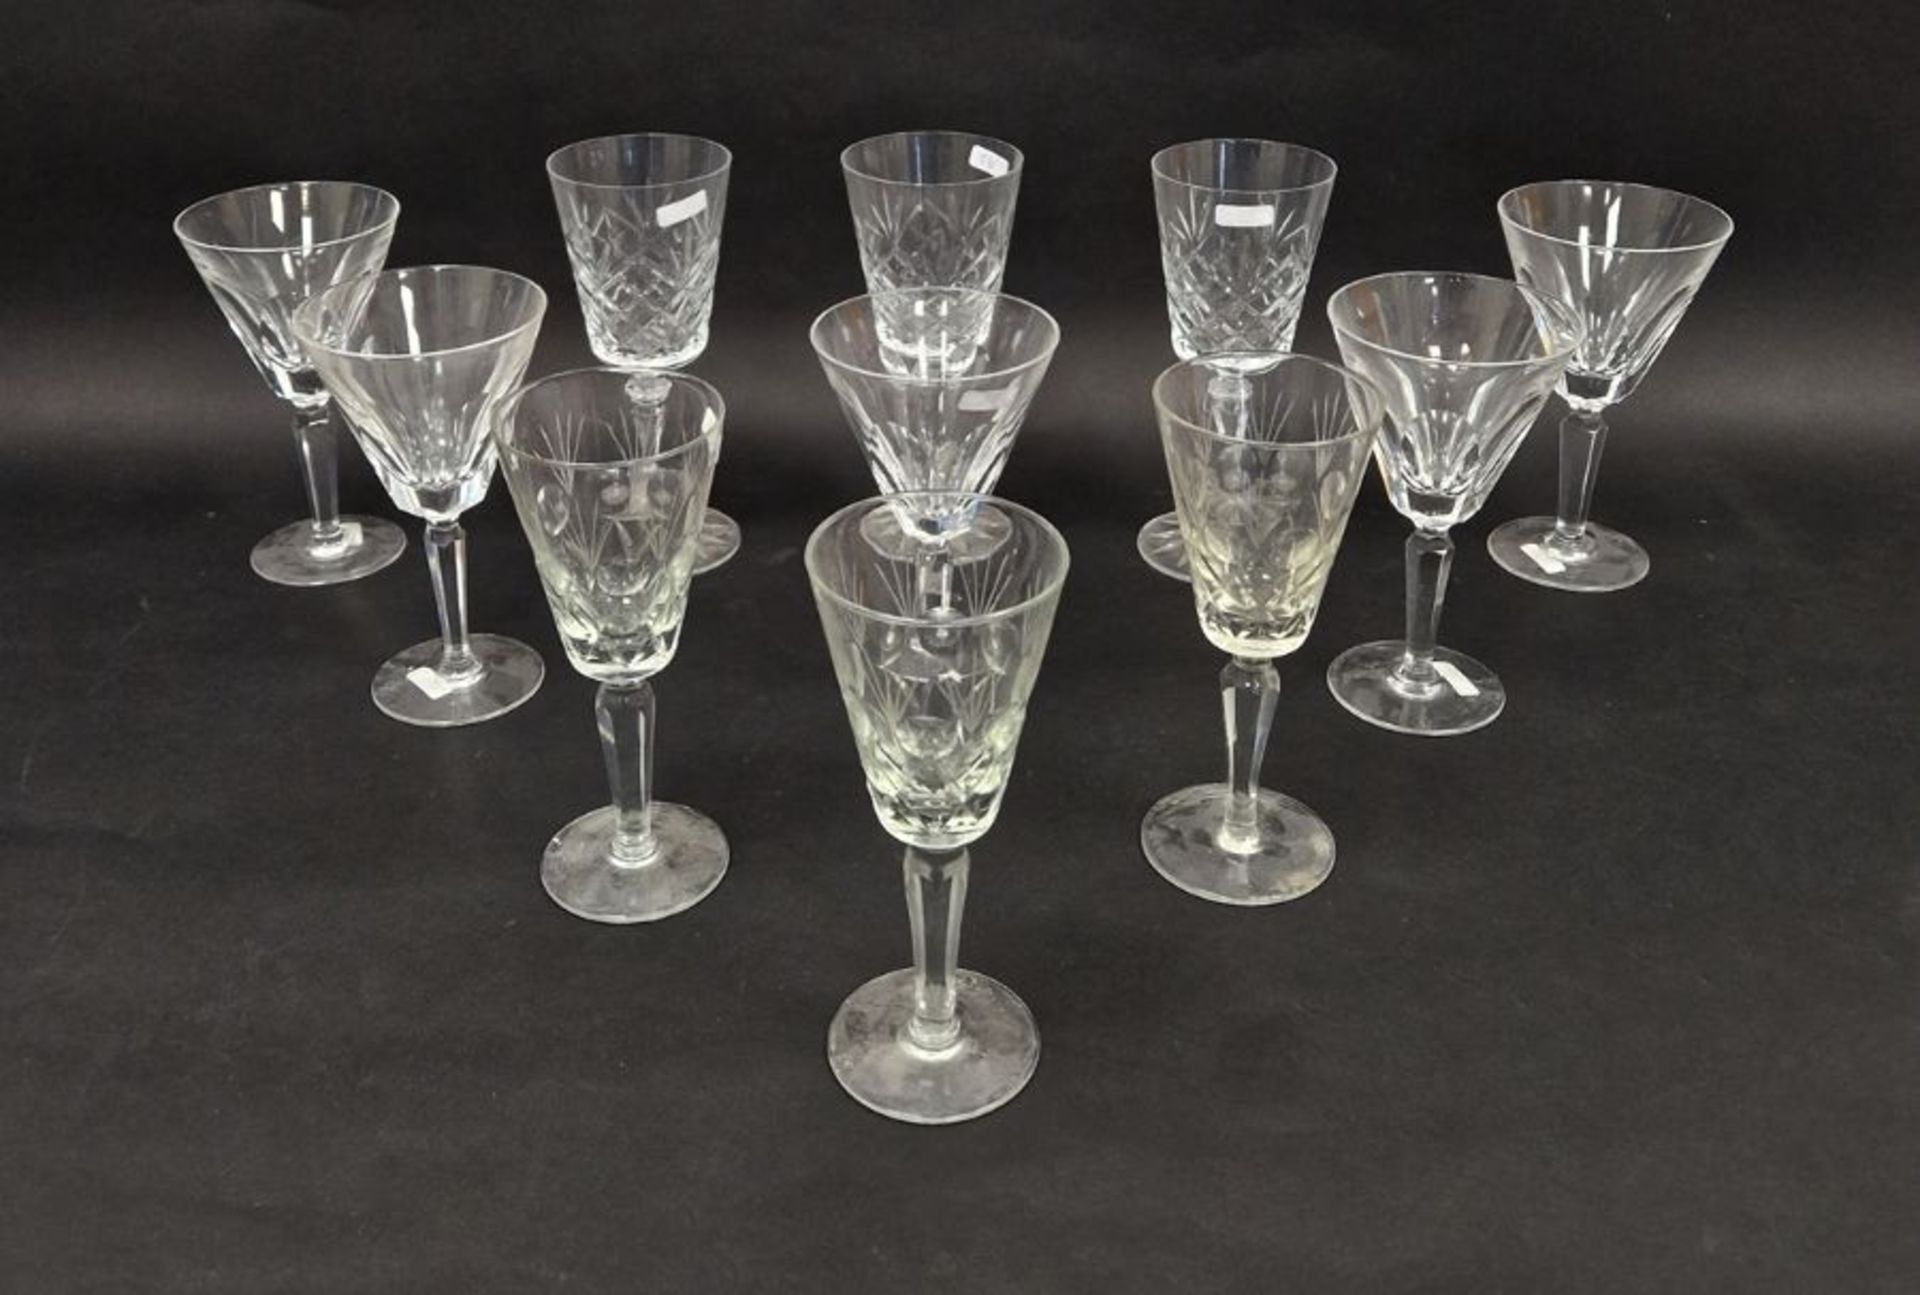 Five Waterford large cut glass wine glasses, etched marks, with lappet-cut conical bowls on